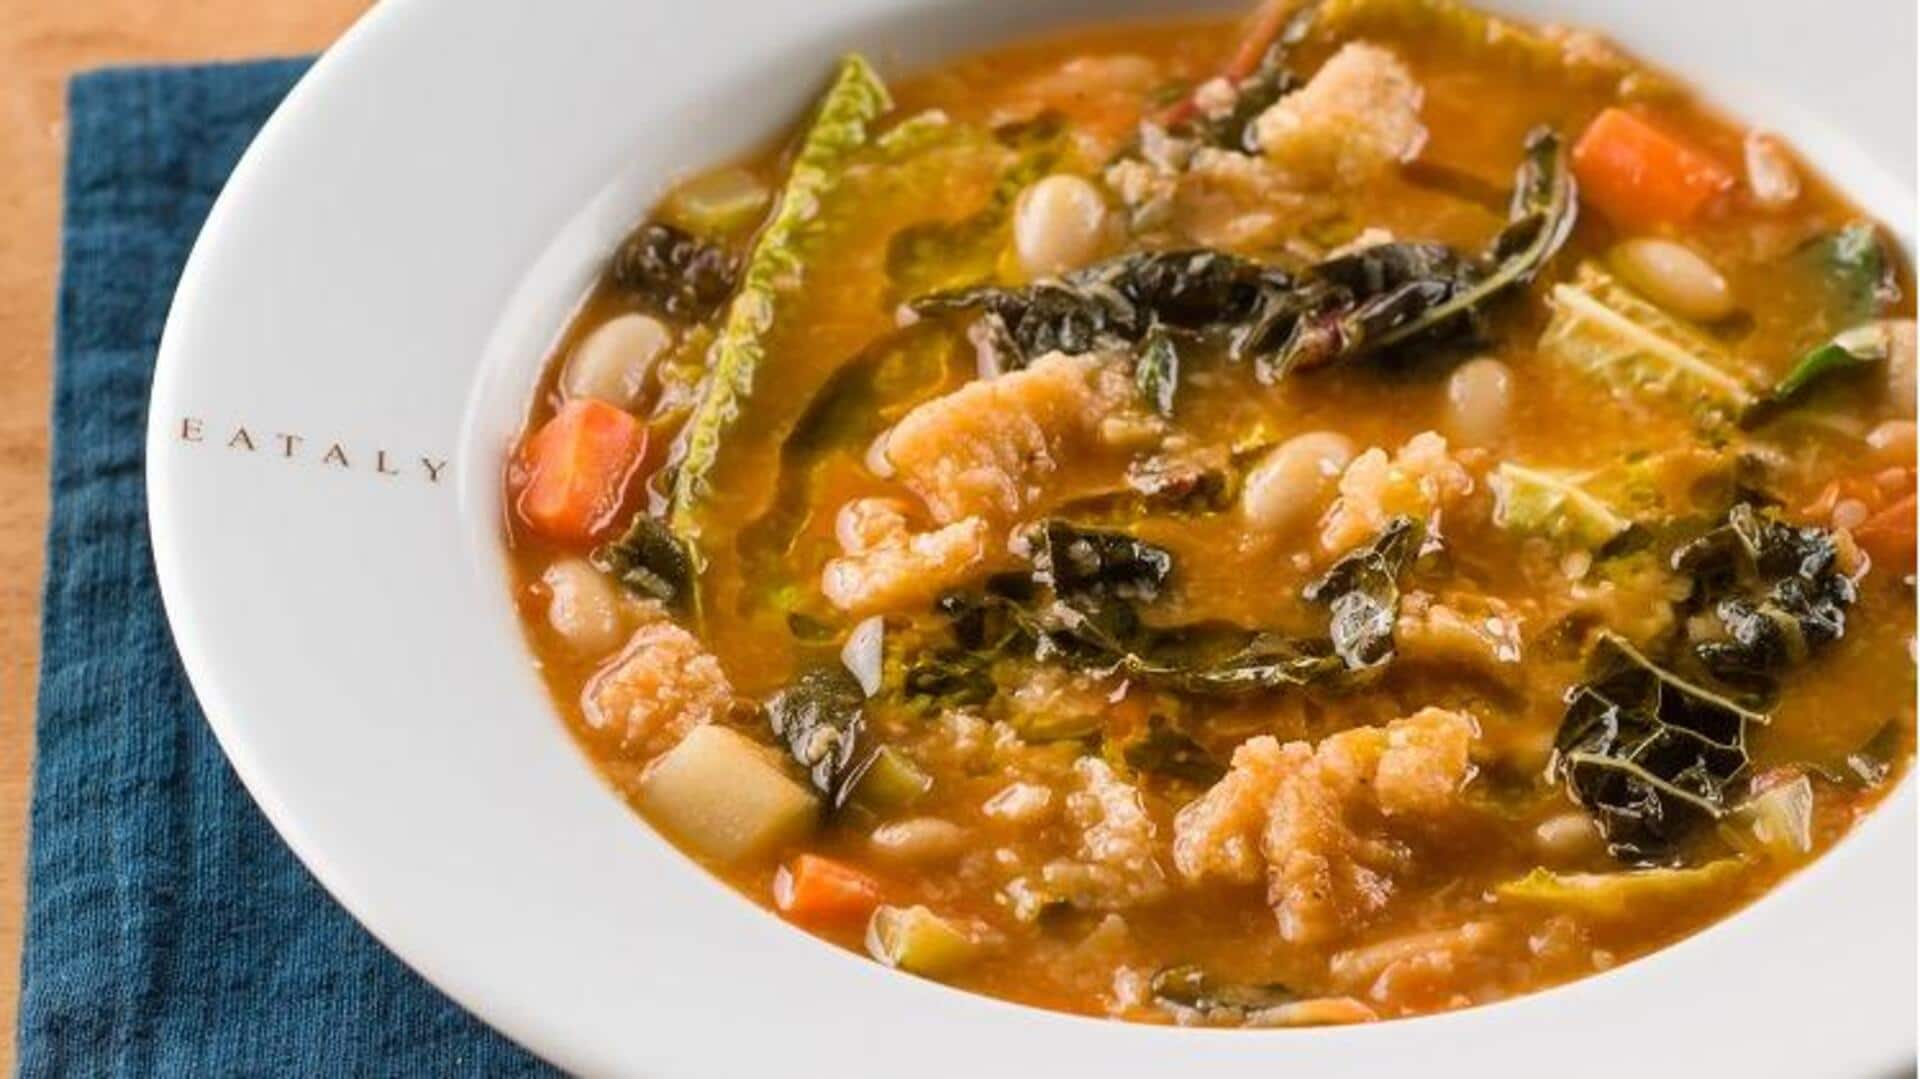 This Tuscan ribollita soup recipe will impress your guests